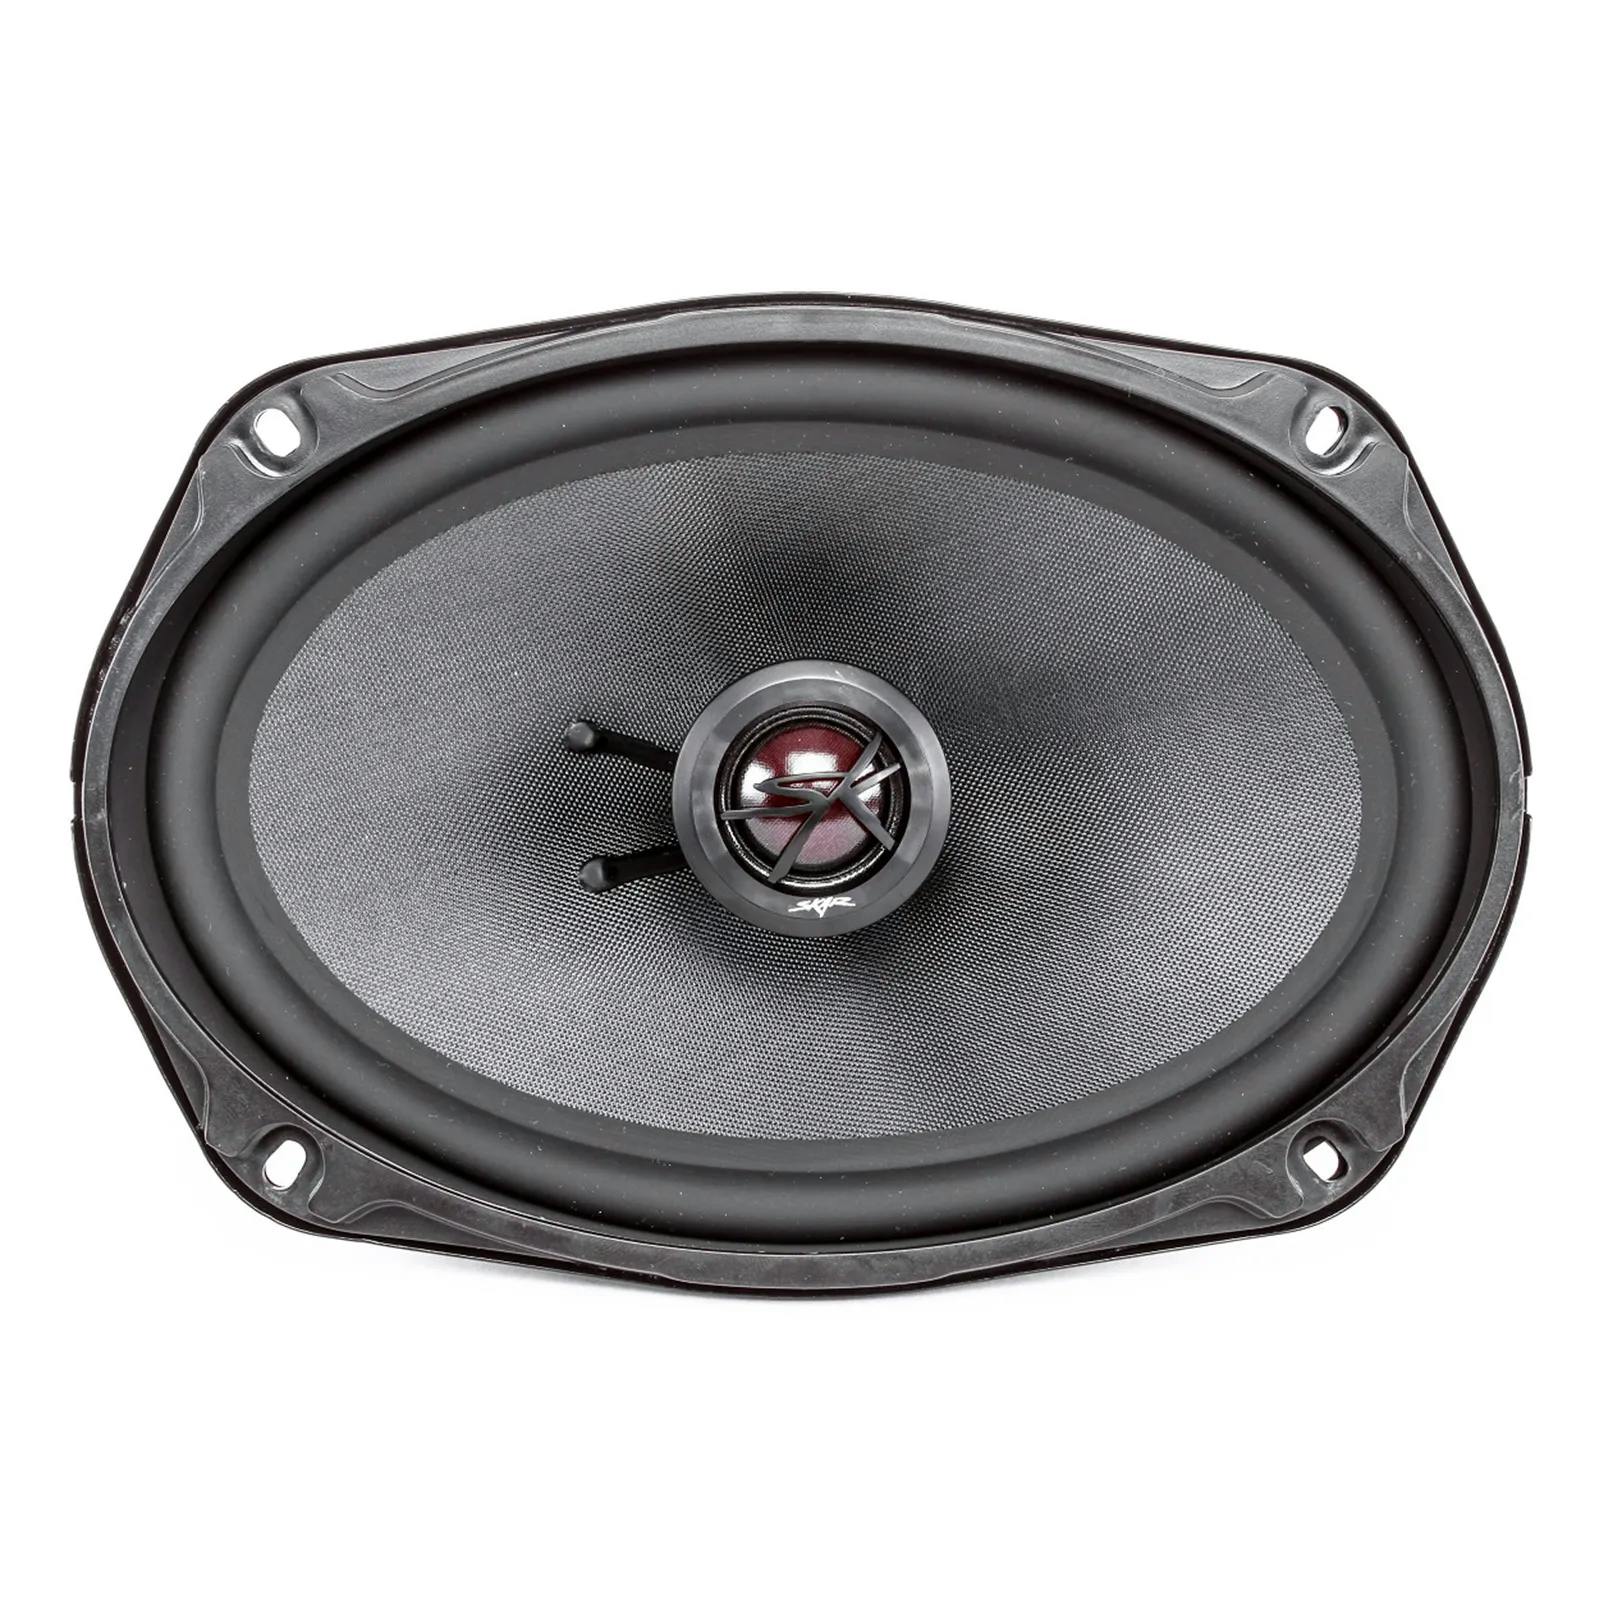 Featured Product Photo 1 for TX69 | 6" x 9" 240 Watt Elite Coaxial Car Speakers - Pair